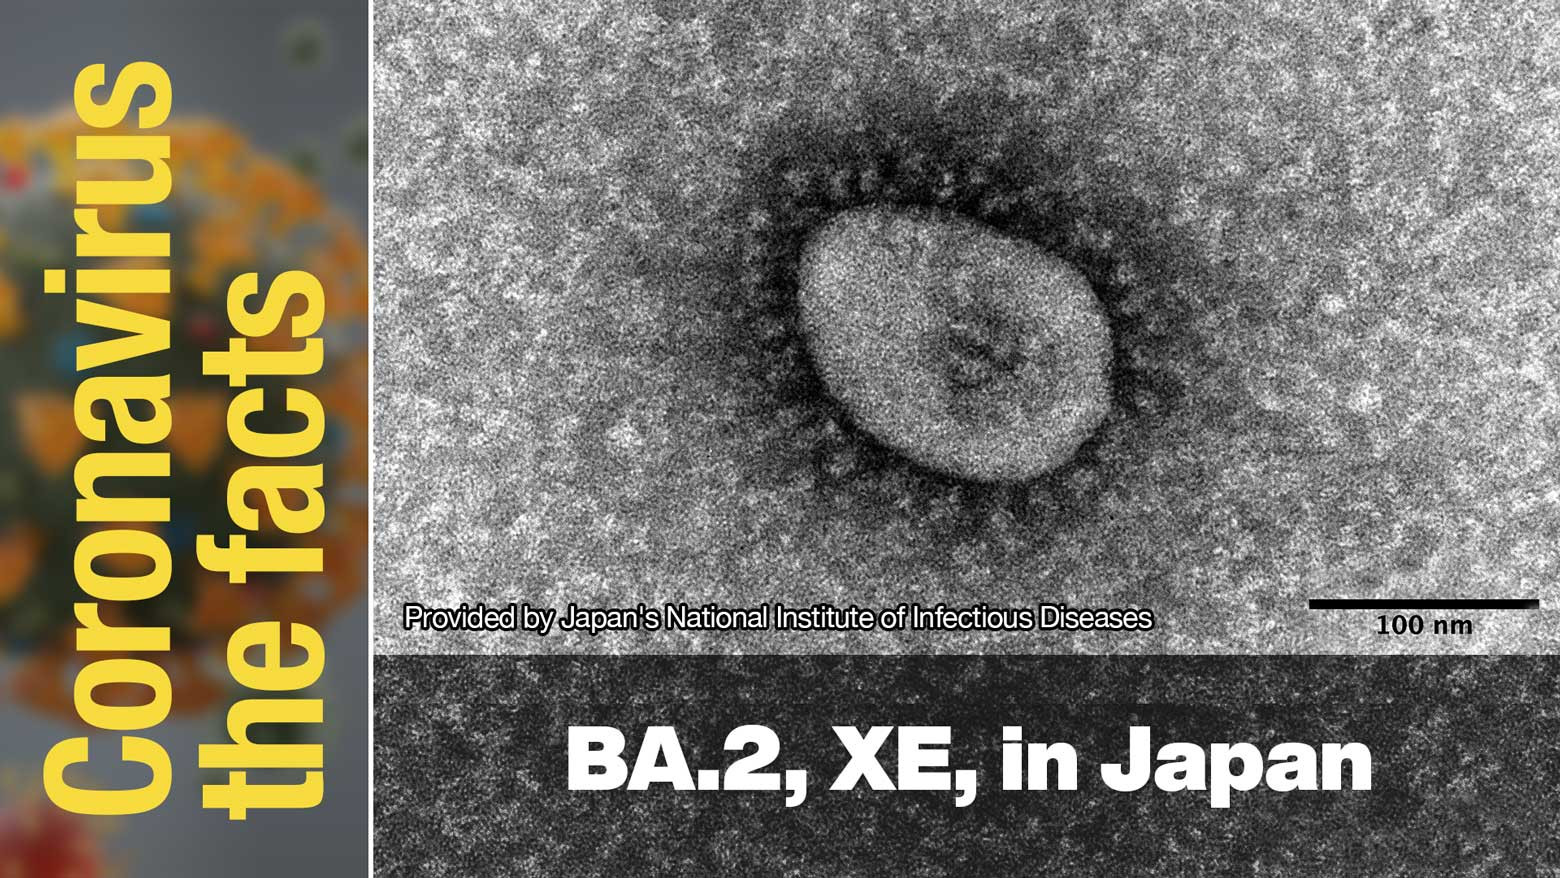 XE strain detected in Japan, BA.2 spreading quickly